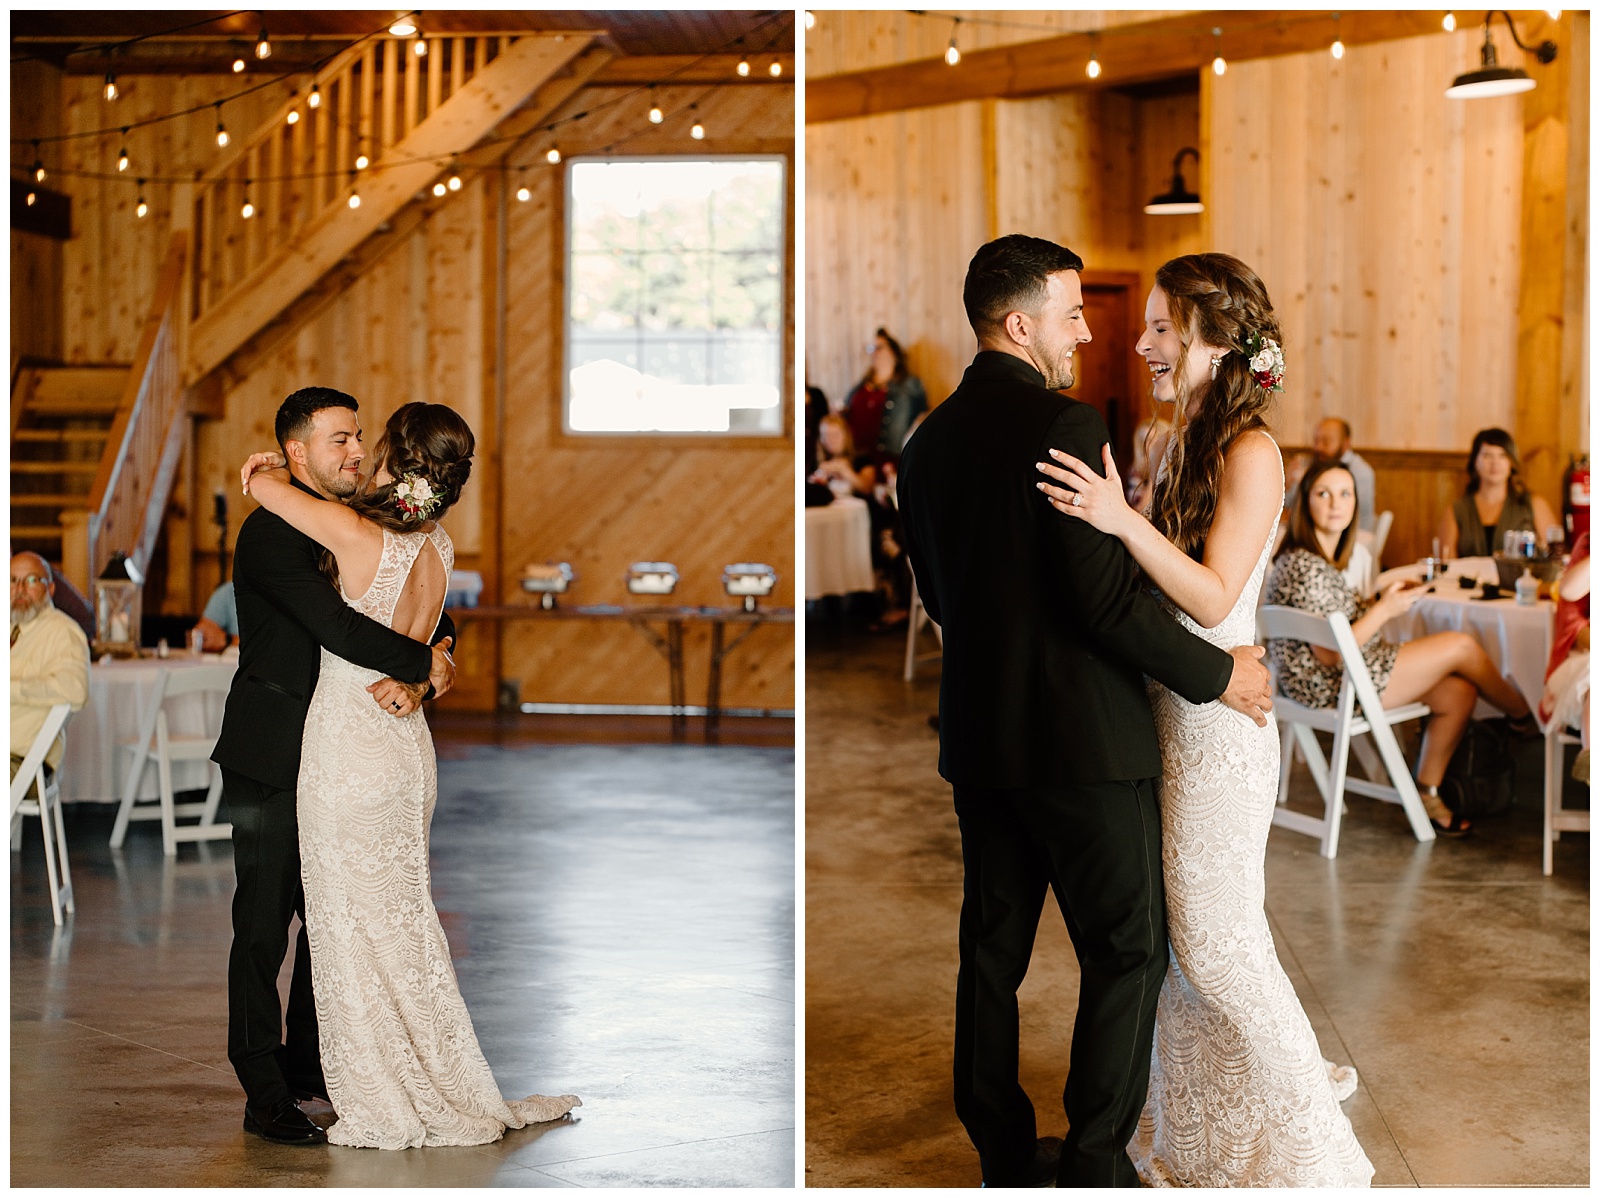 Bride and groom share their first dance together at their reception